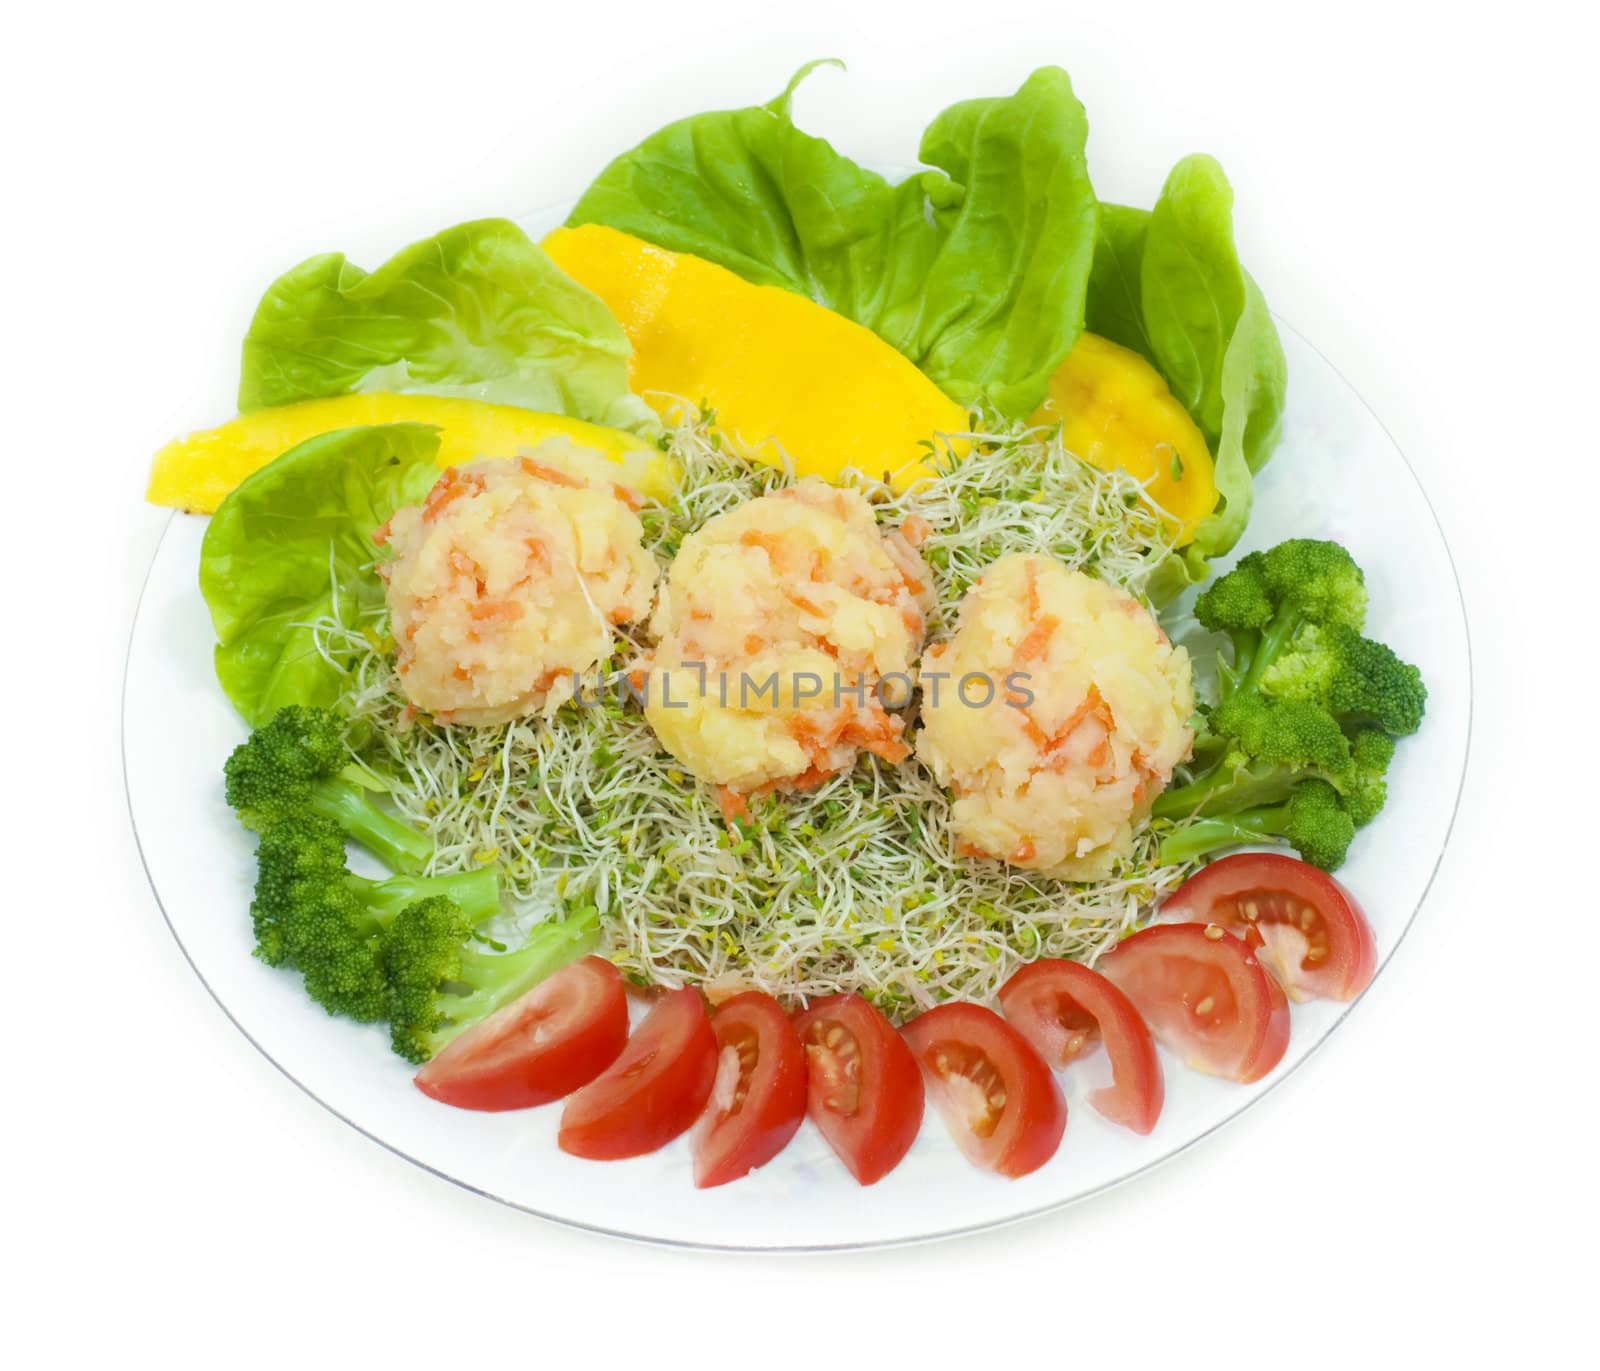 A plate of fresh vegetarian potato salad with fruits and vegetables isolated on white.